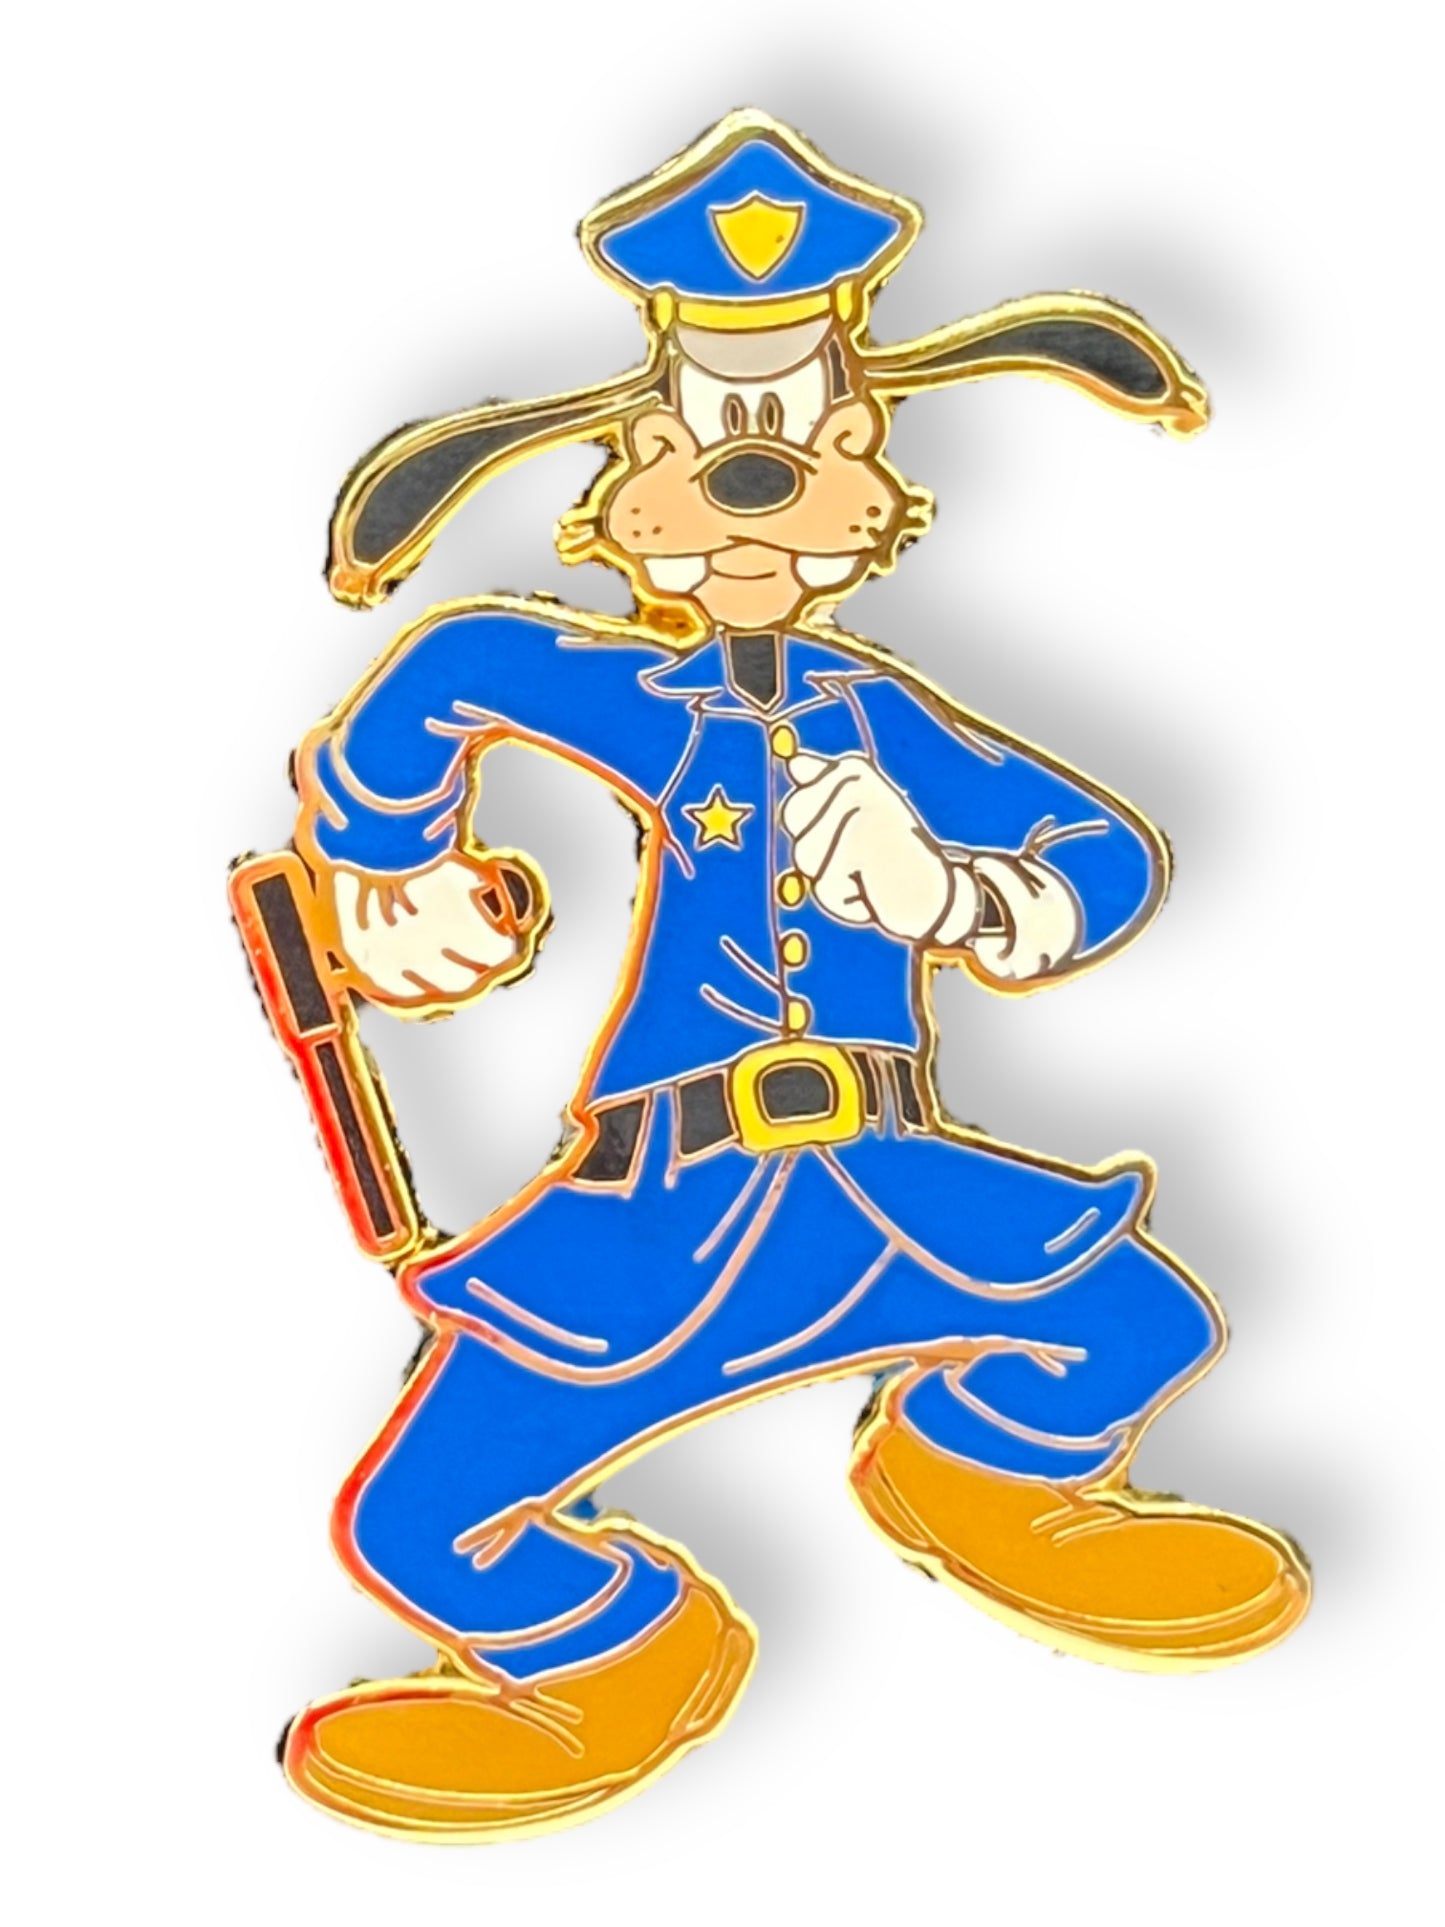 Disney Shopping Professional's Day Police Officer Goofy Pin